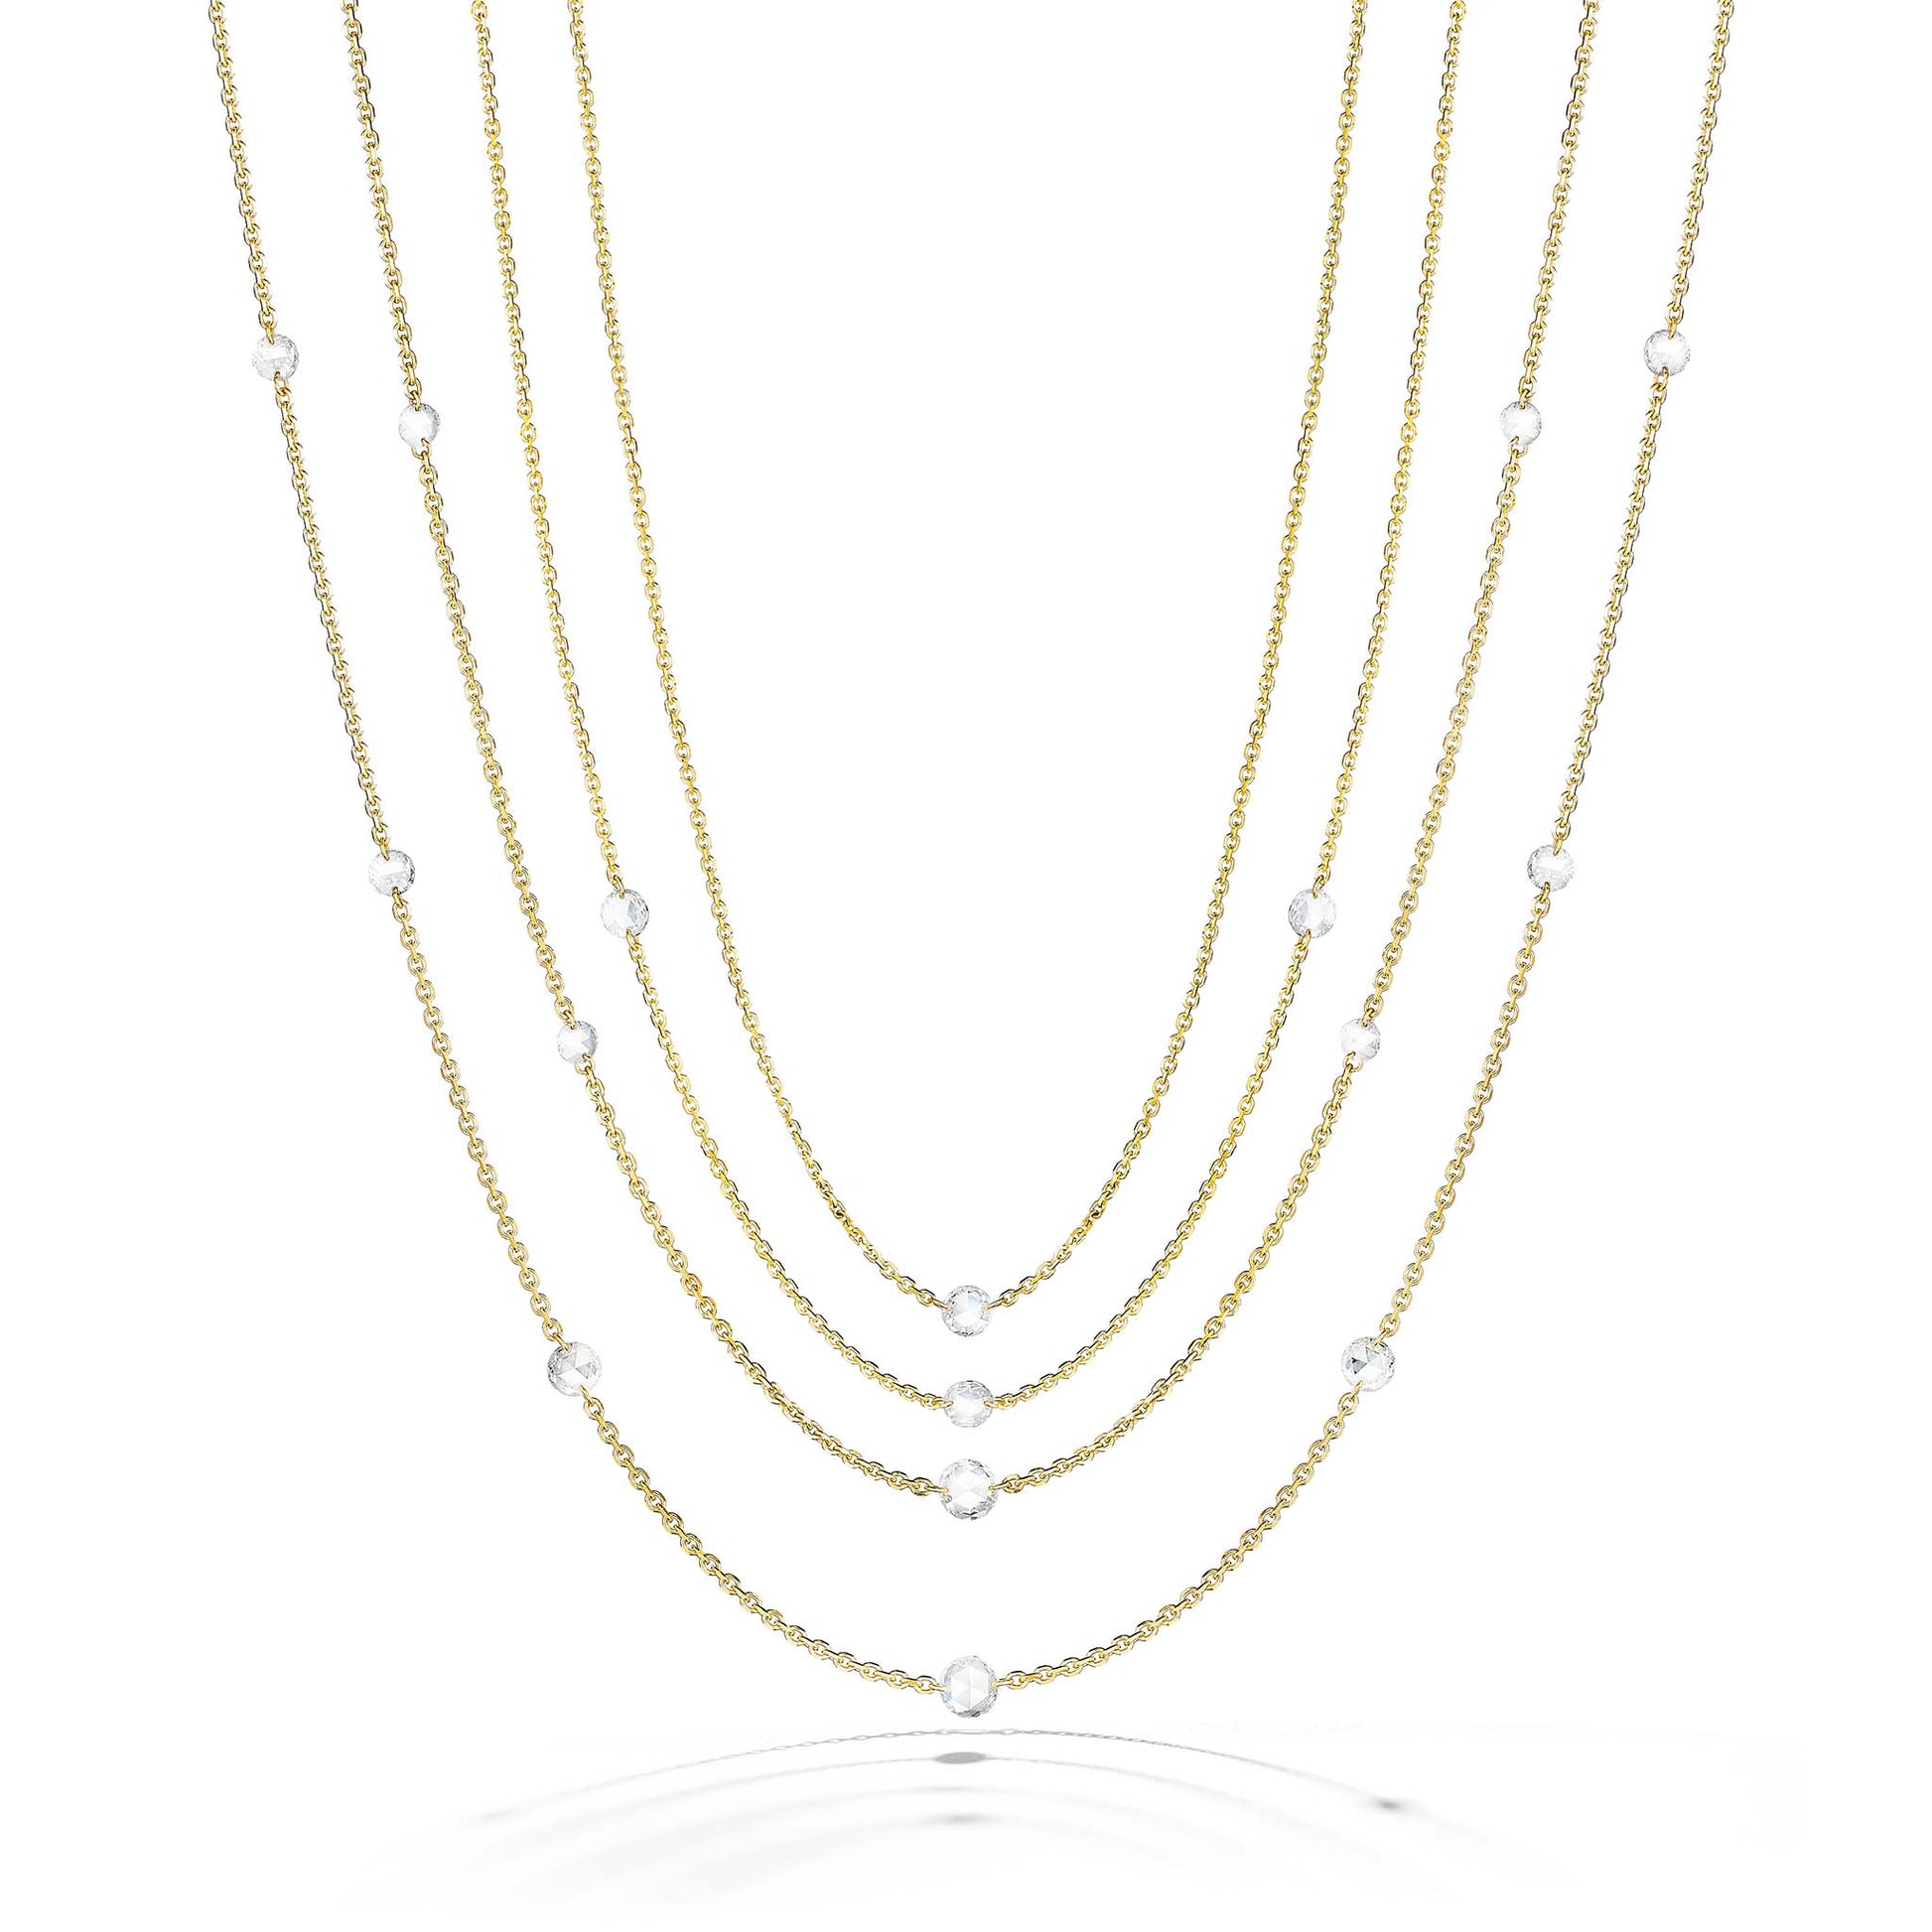 Mimi So Rosette Rose Cut Diamond Necklaces Layered group